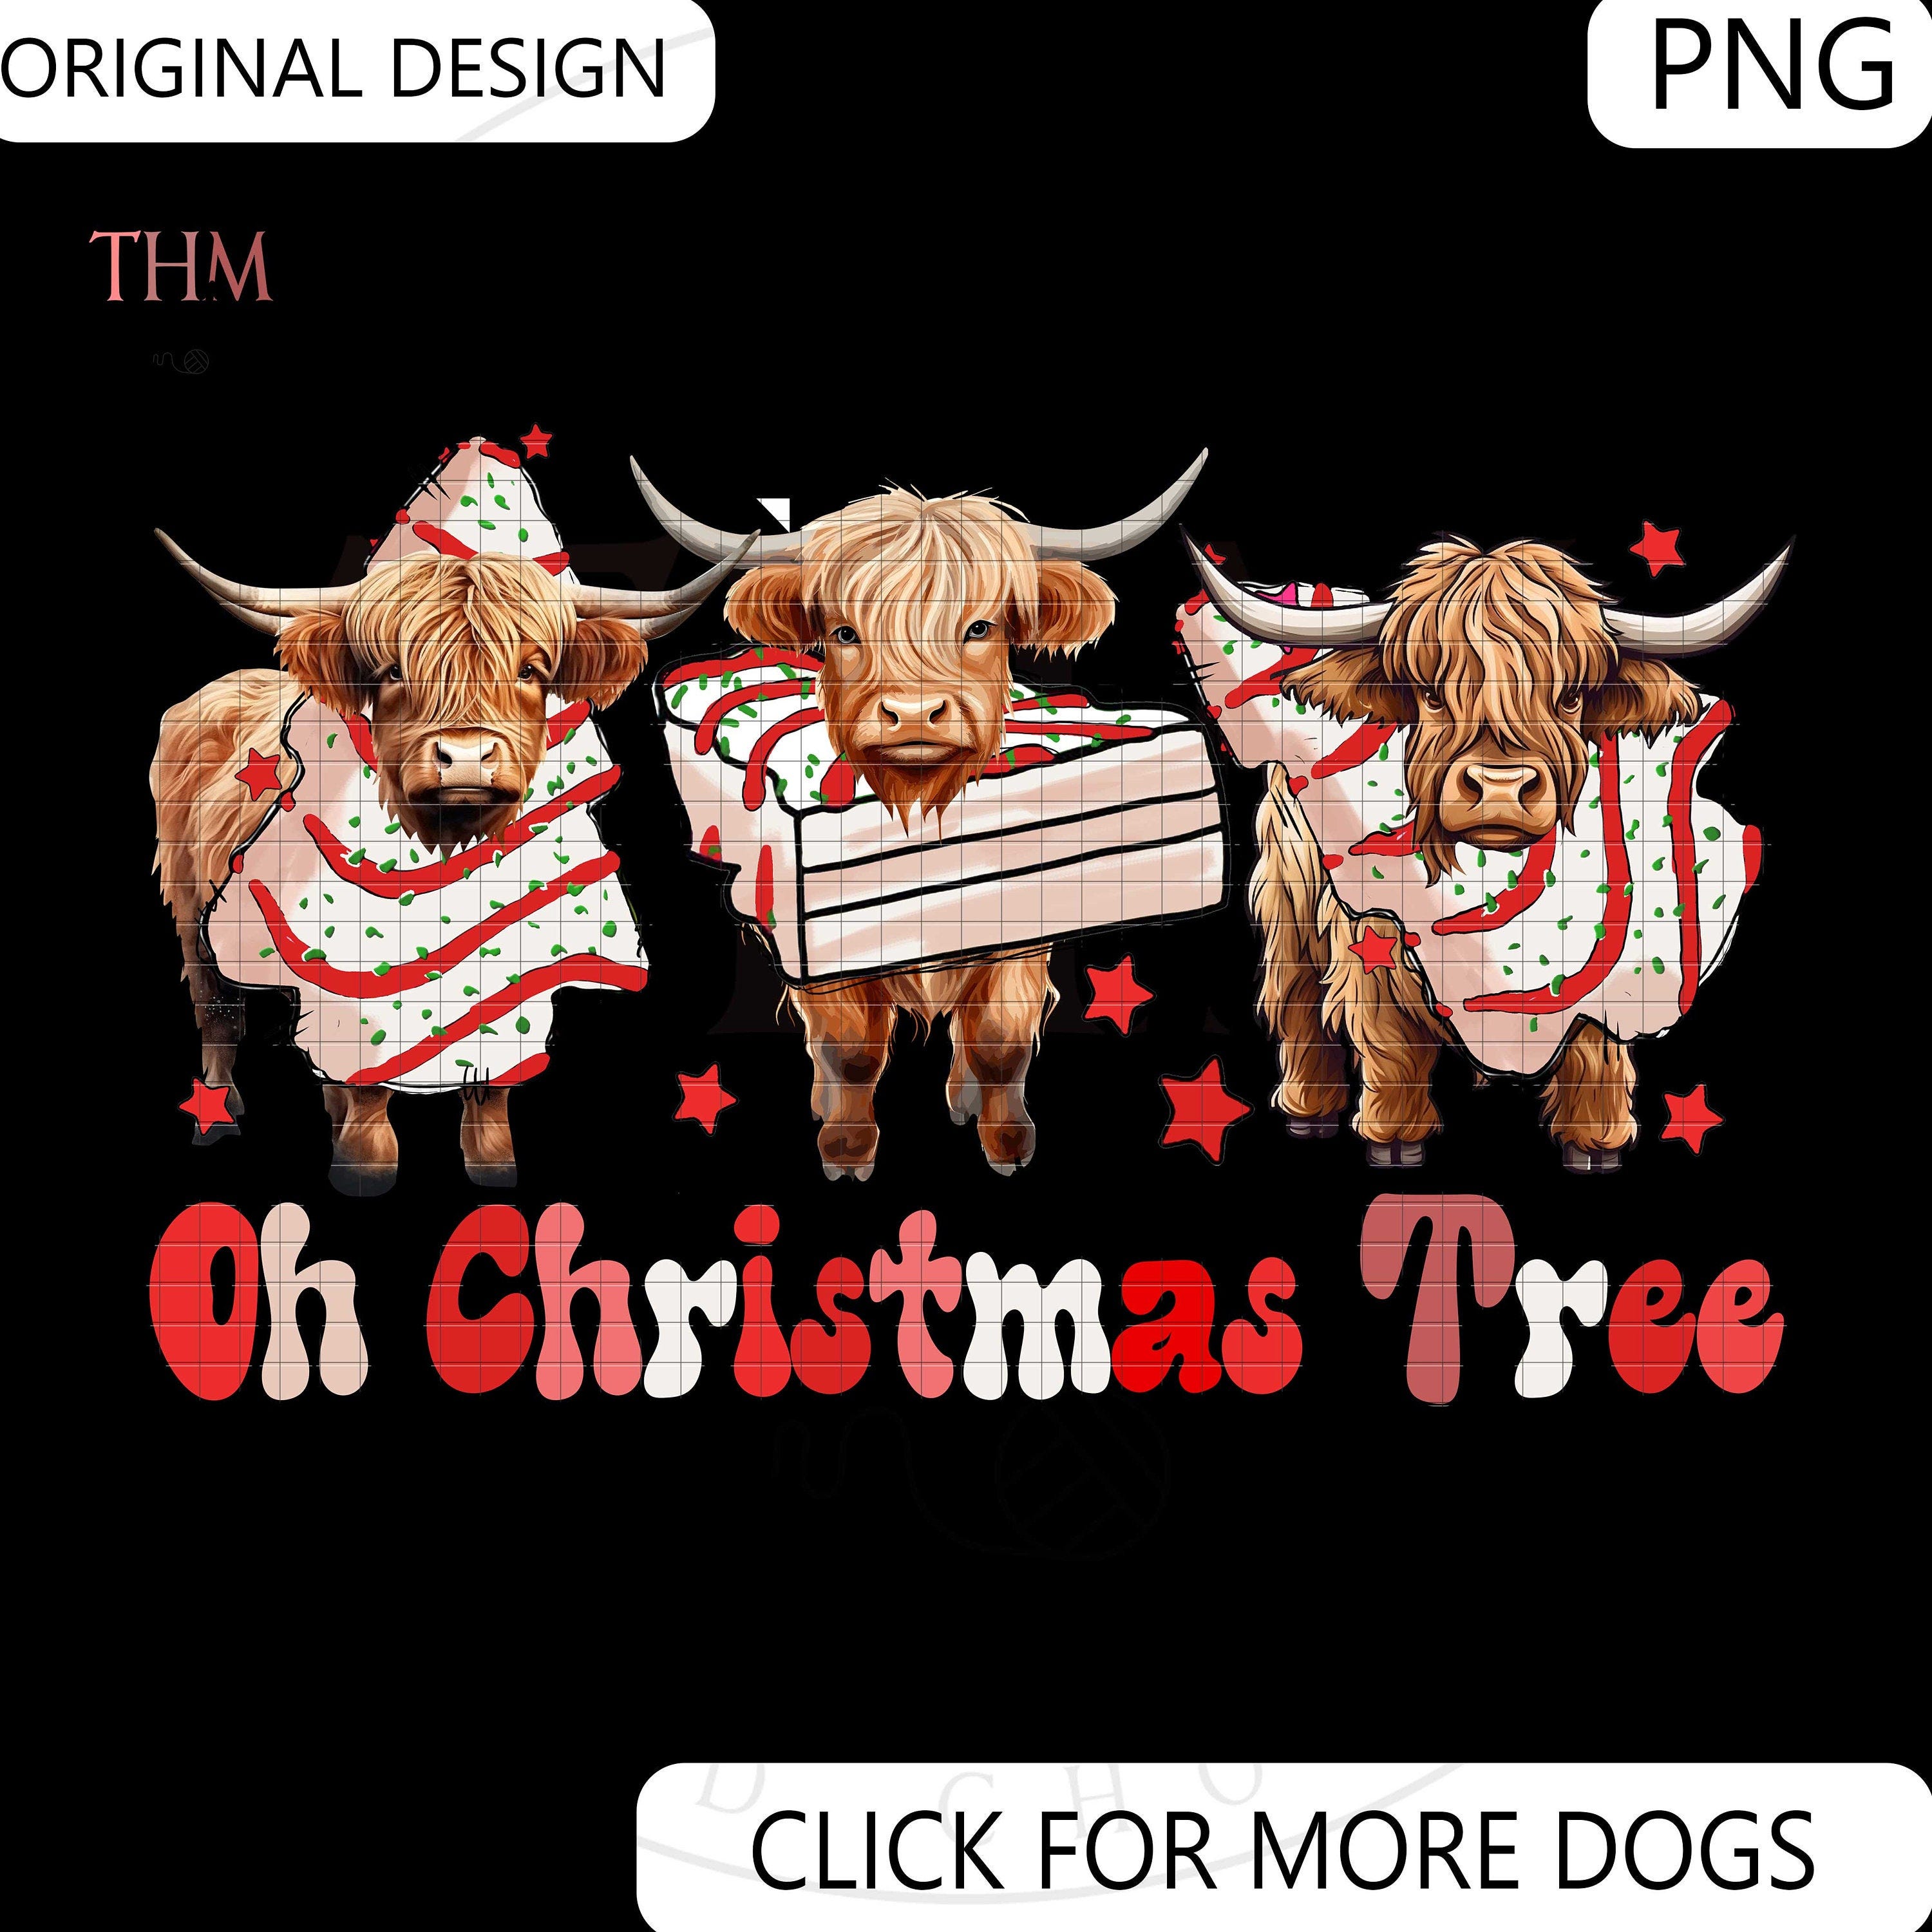 Merry Christmas Cake Trending Png/ Oh Christmas Tree Funny Design Png/ Cow Highland Christmas/ Funny Cow Cute Christmas instant download.